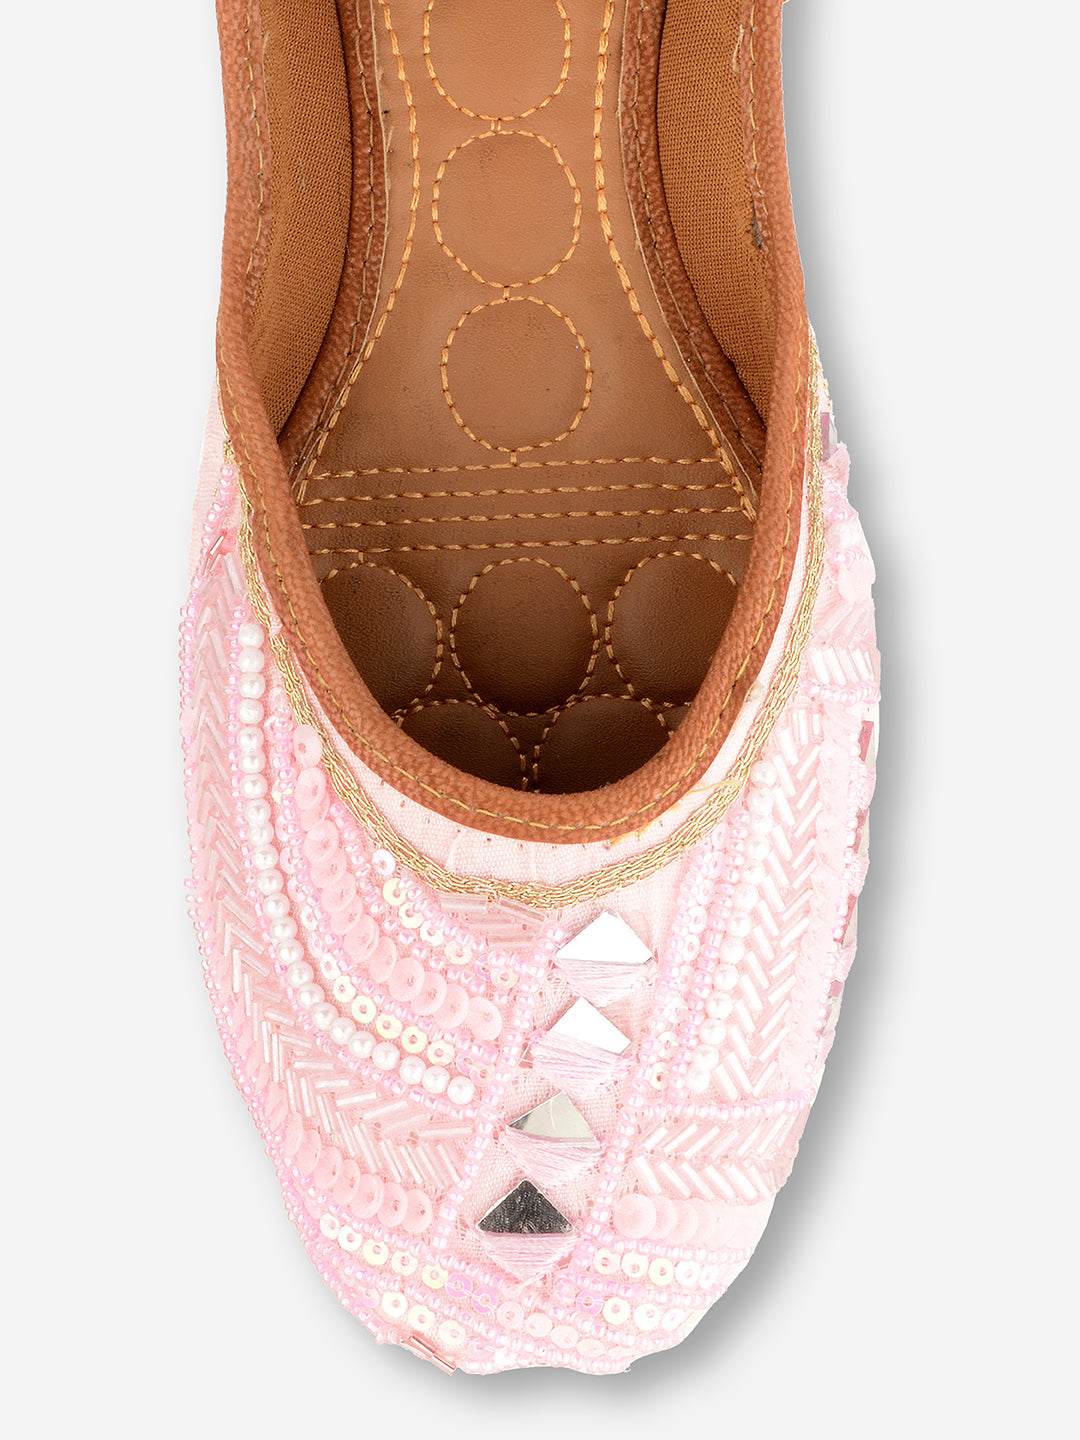 DESI COLOUR Women Pink Ethnic Ballerinas with Laser Cuts Flats